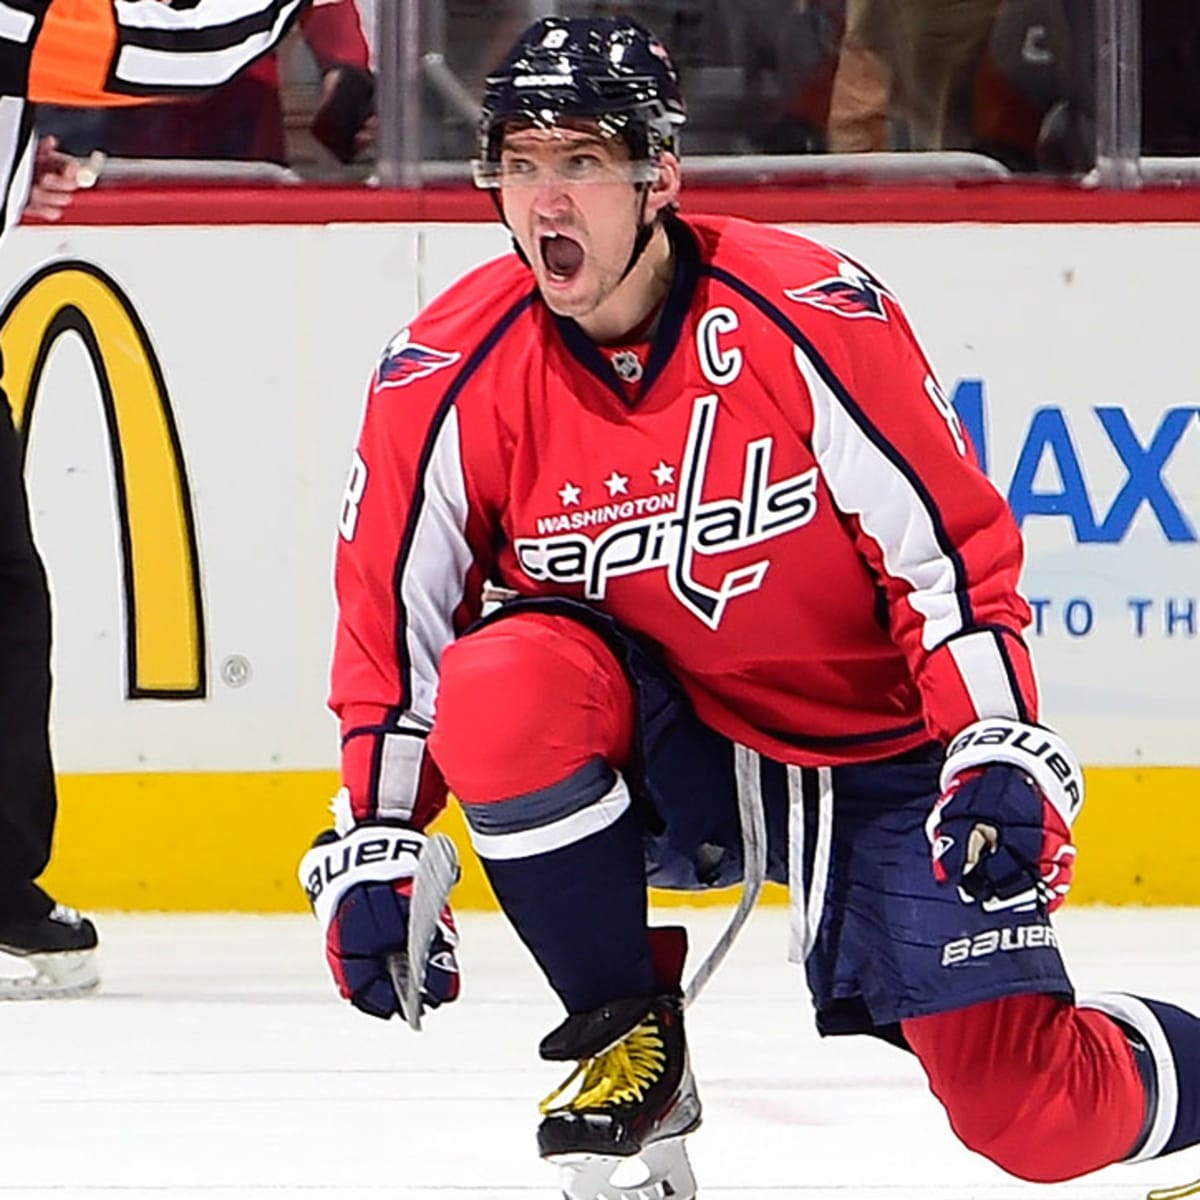 Alex Ovechkin tallies 1,000th point after scoring in game's first minute!